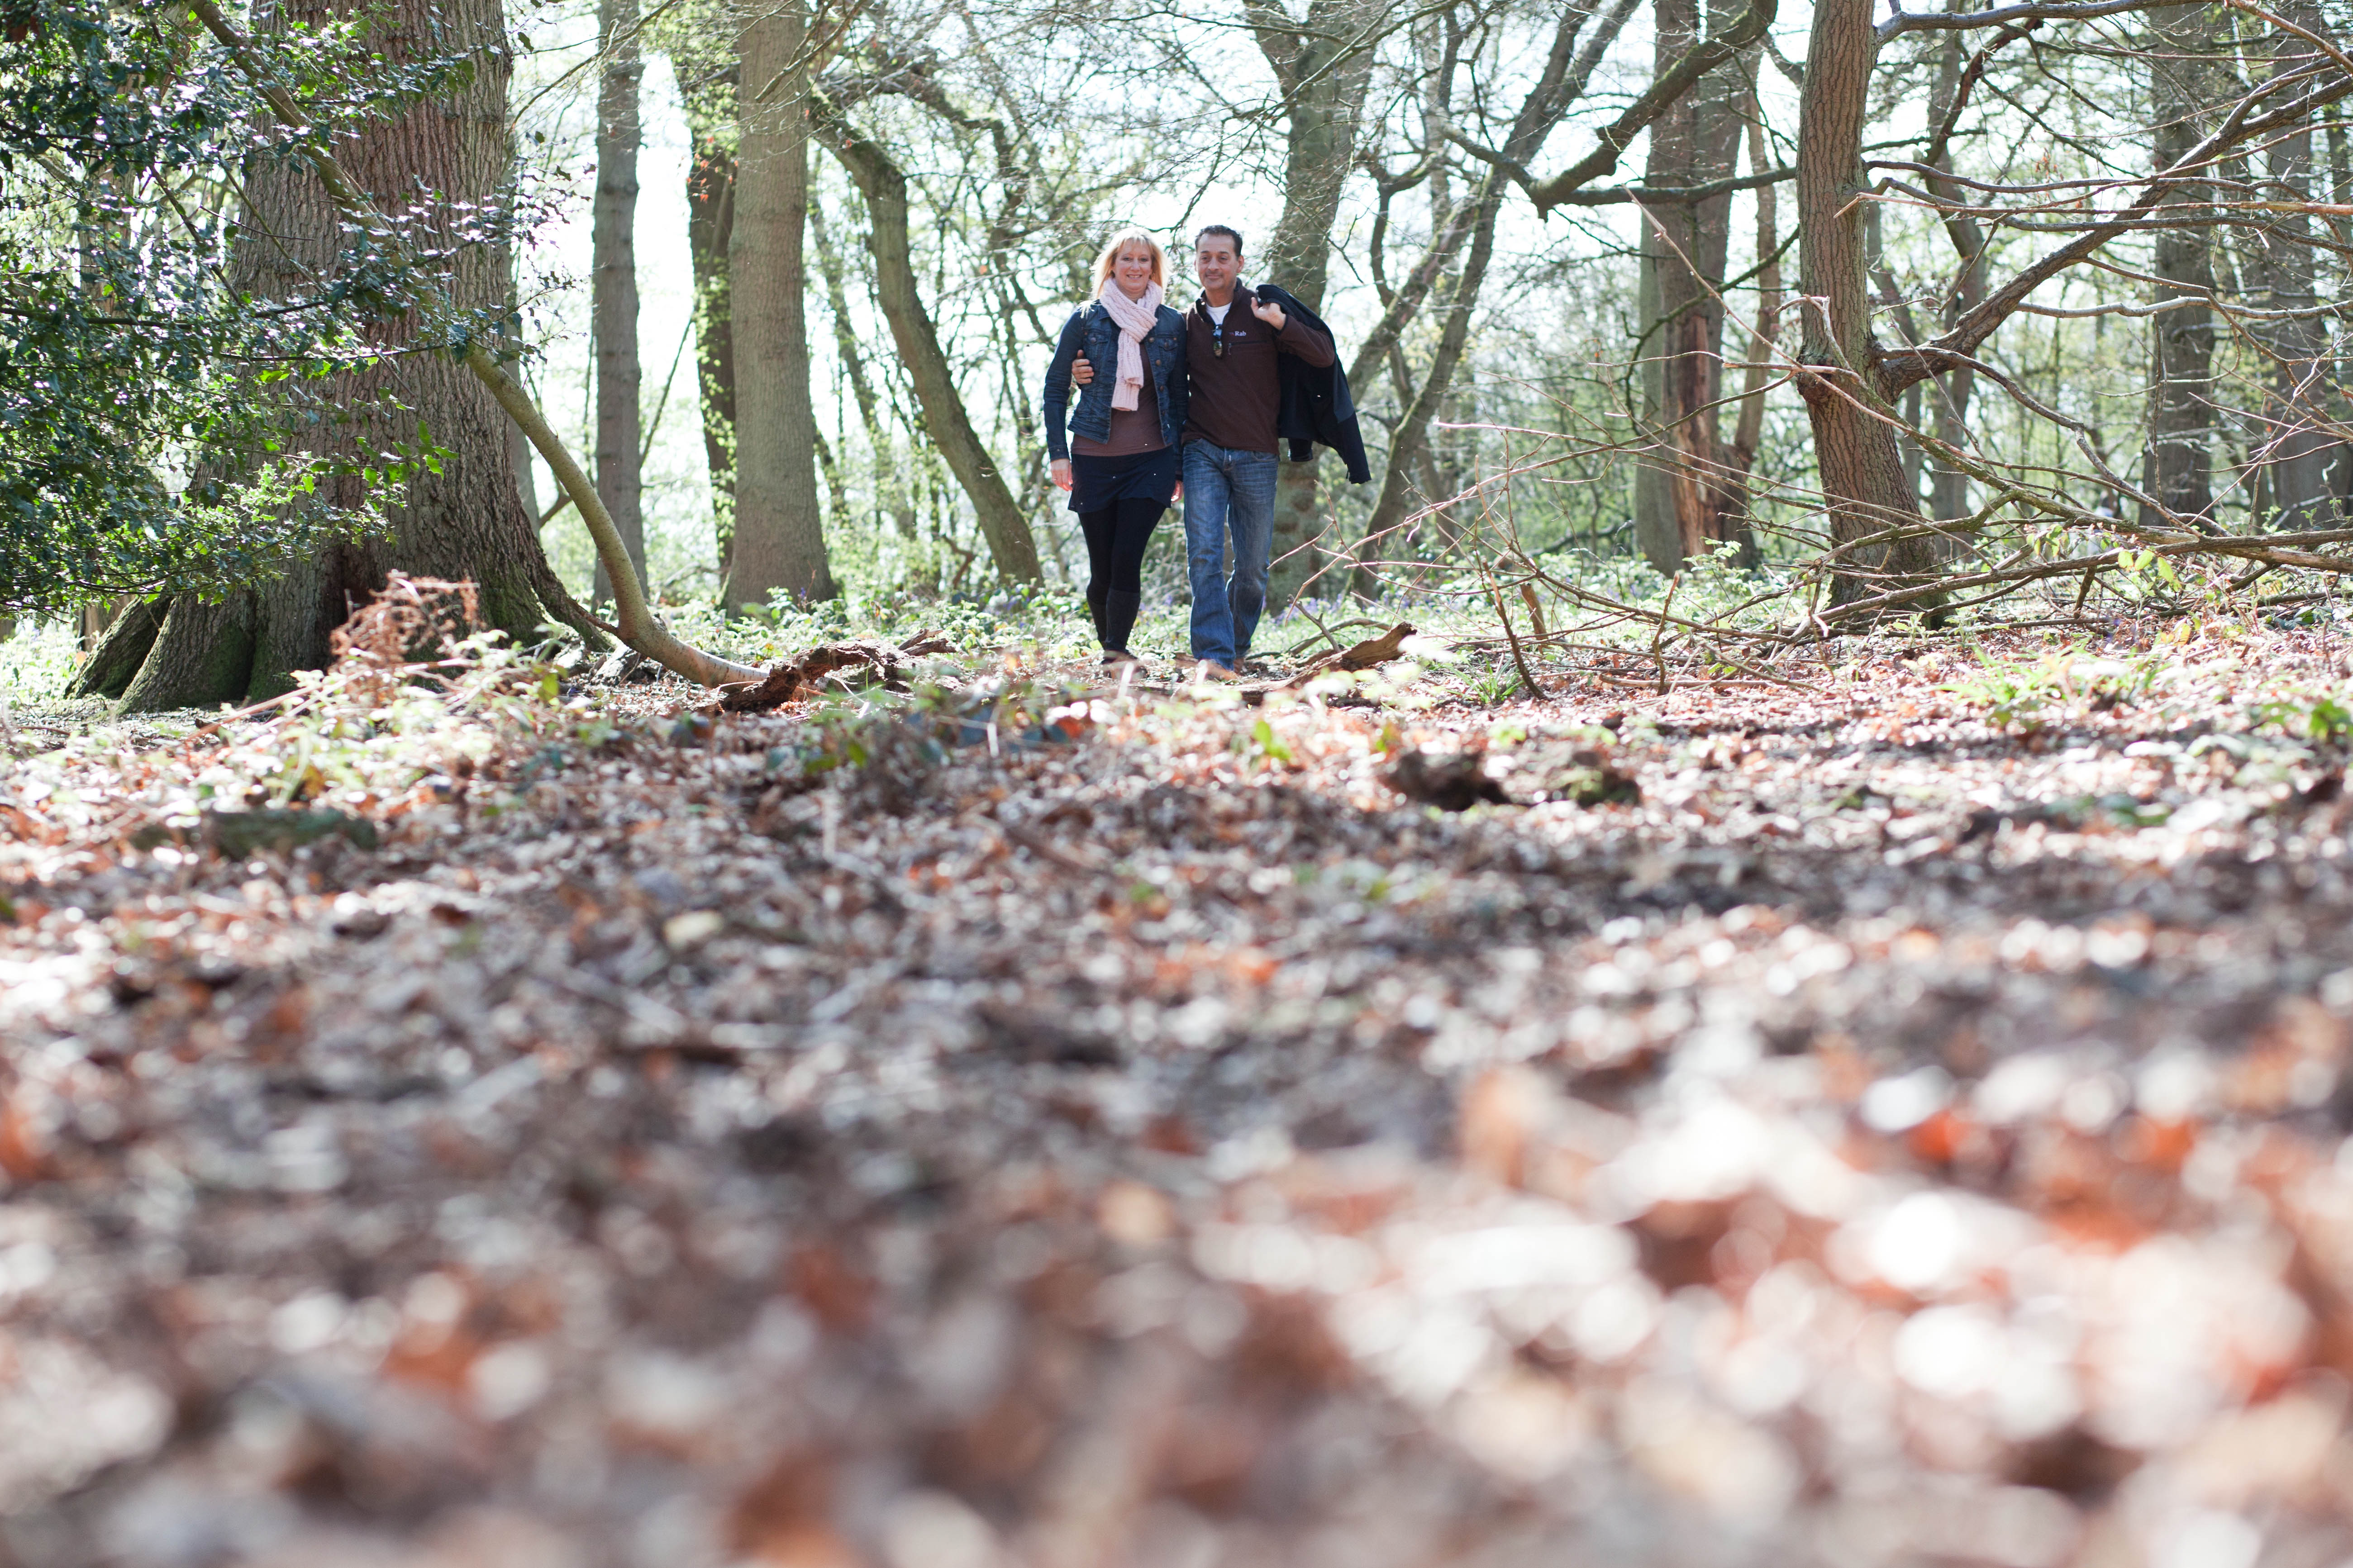 Man and lady arm in arm walking through wood across autumn leaves.